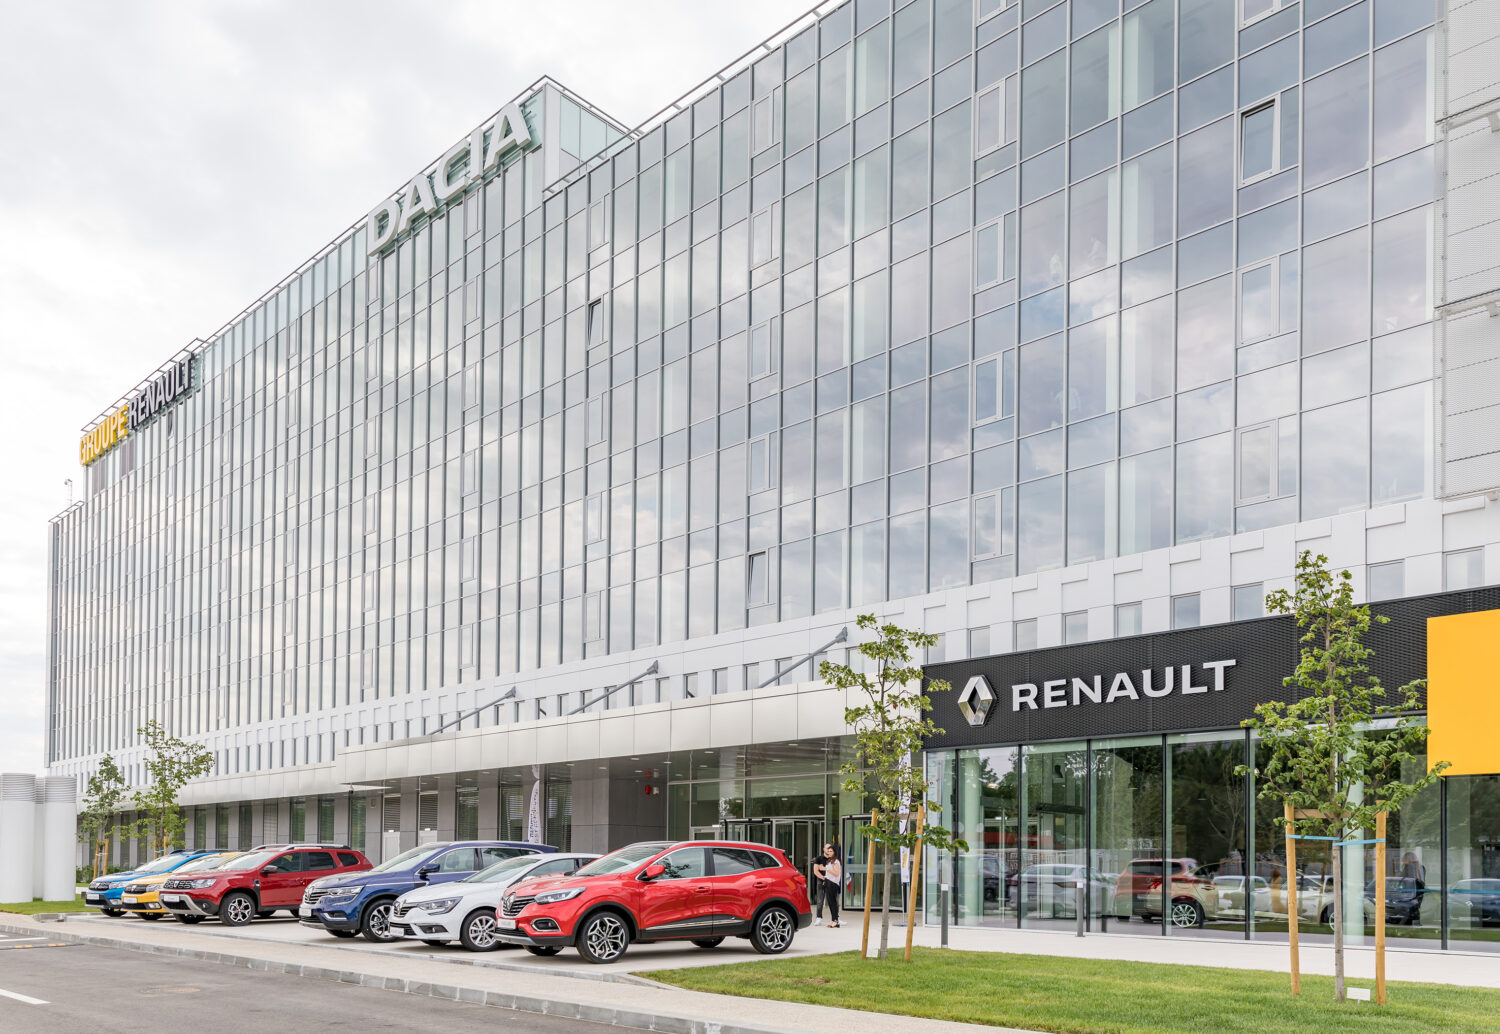 2019 - Inauguration of the new Renault Bucharest Connected centre